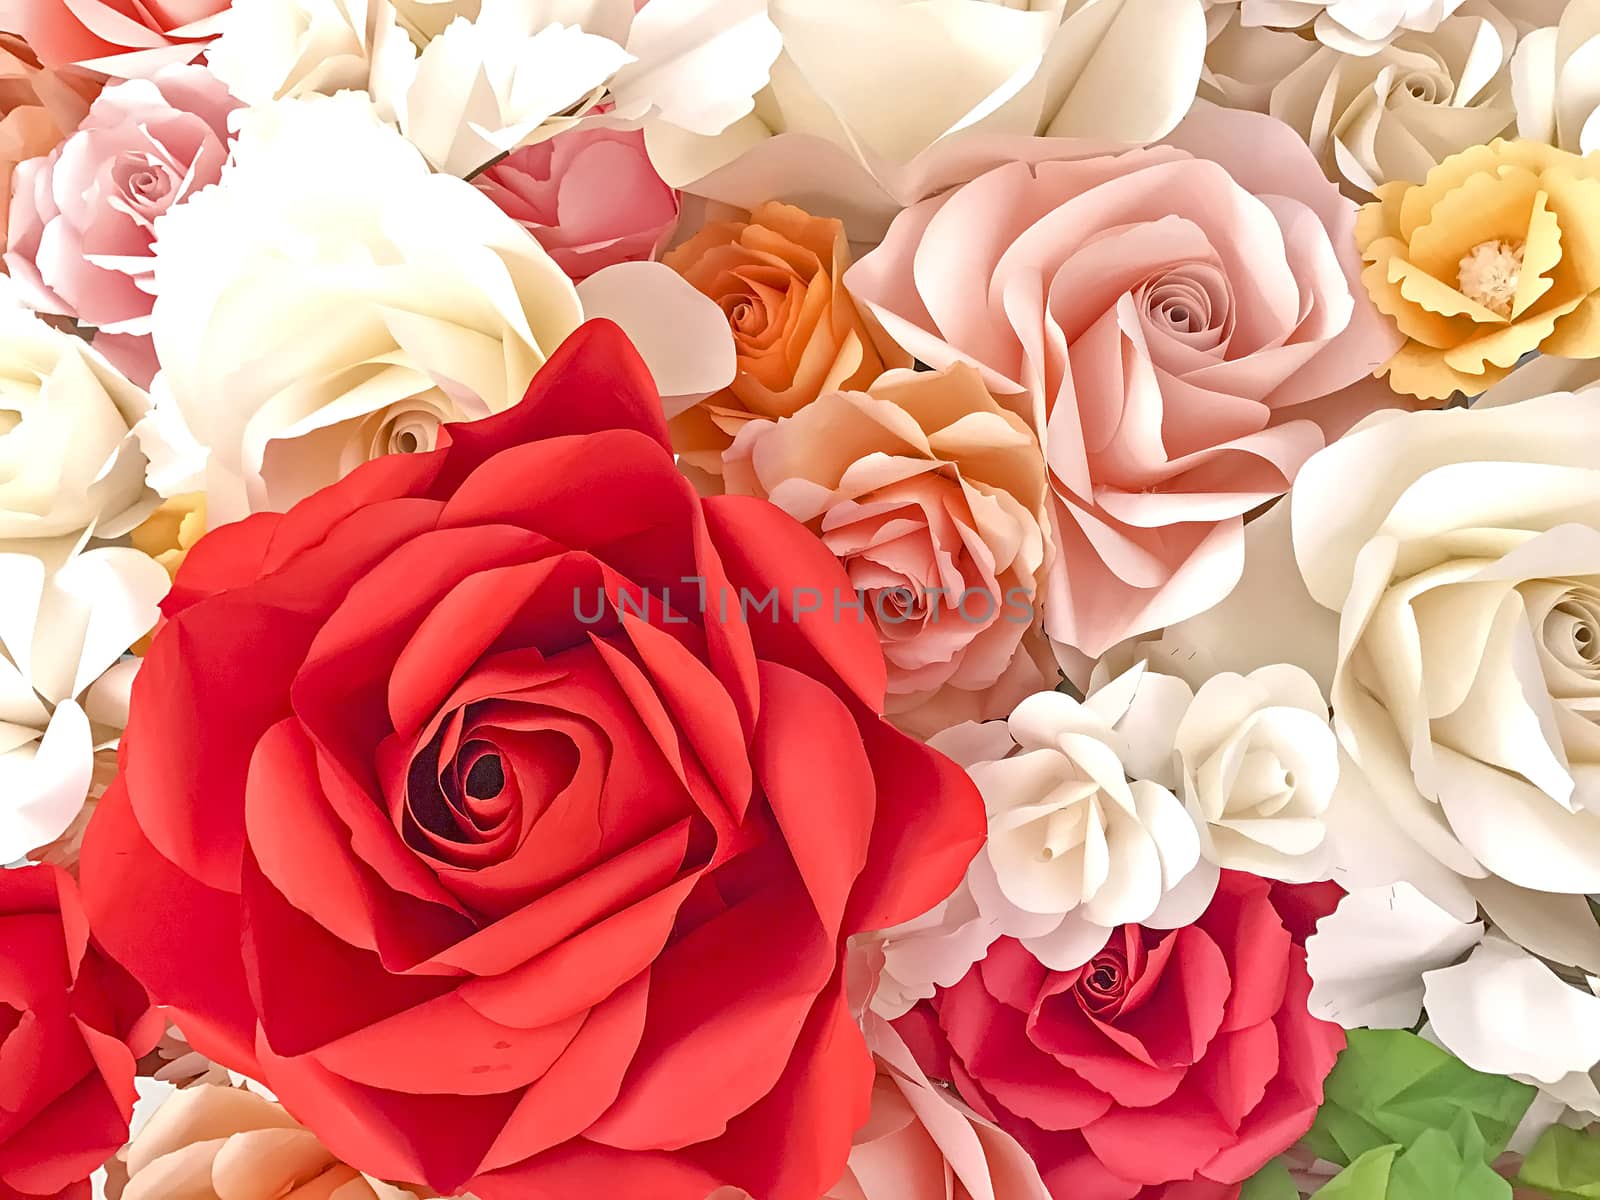 Roses background for valentine's day by TakerWalker